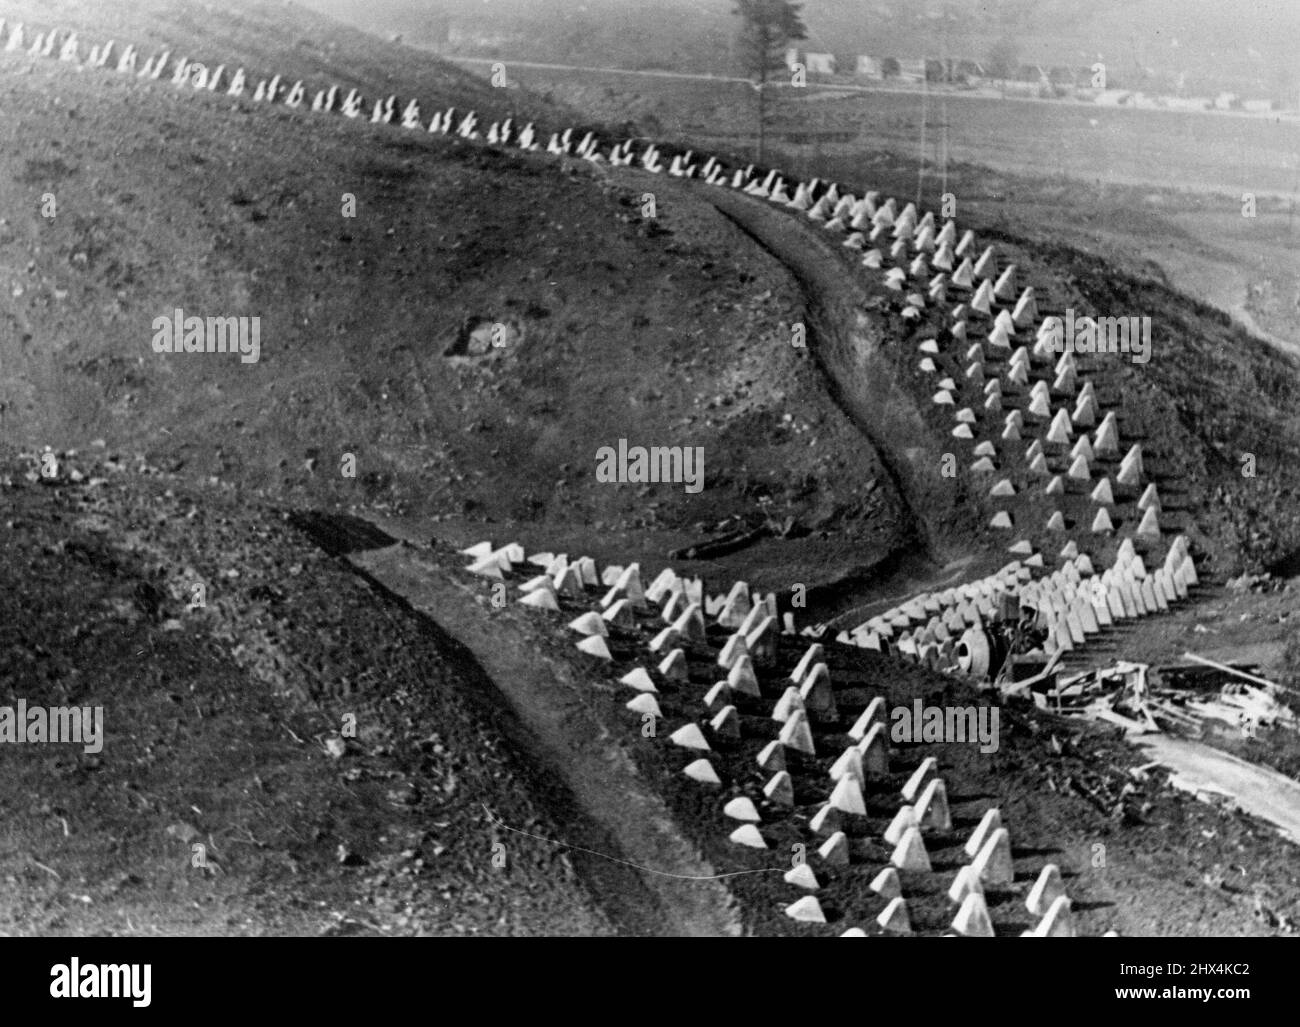 First Pictures Of Germany's Siegfried Line -- Over hill and down dale stretch these lines of reinforced concrete tank barriers - described as the gravestones of tanks. These are the first pictures of Germany's new Siegfried line fortifications along that Western frontiers, described as 'The most modern ad astounding works of our time'. October 25, 1938. (Photo by Keystone). Stock Photo